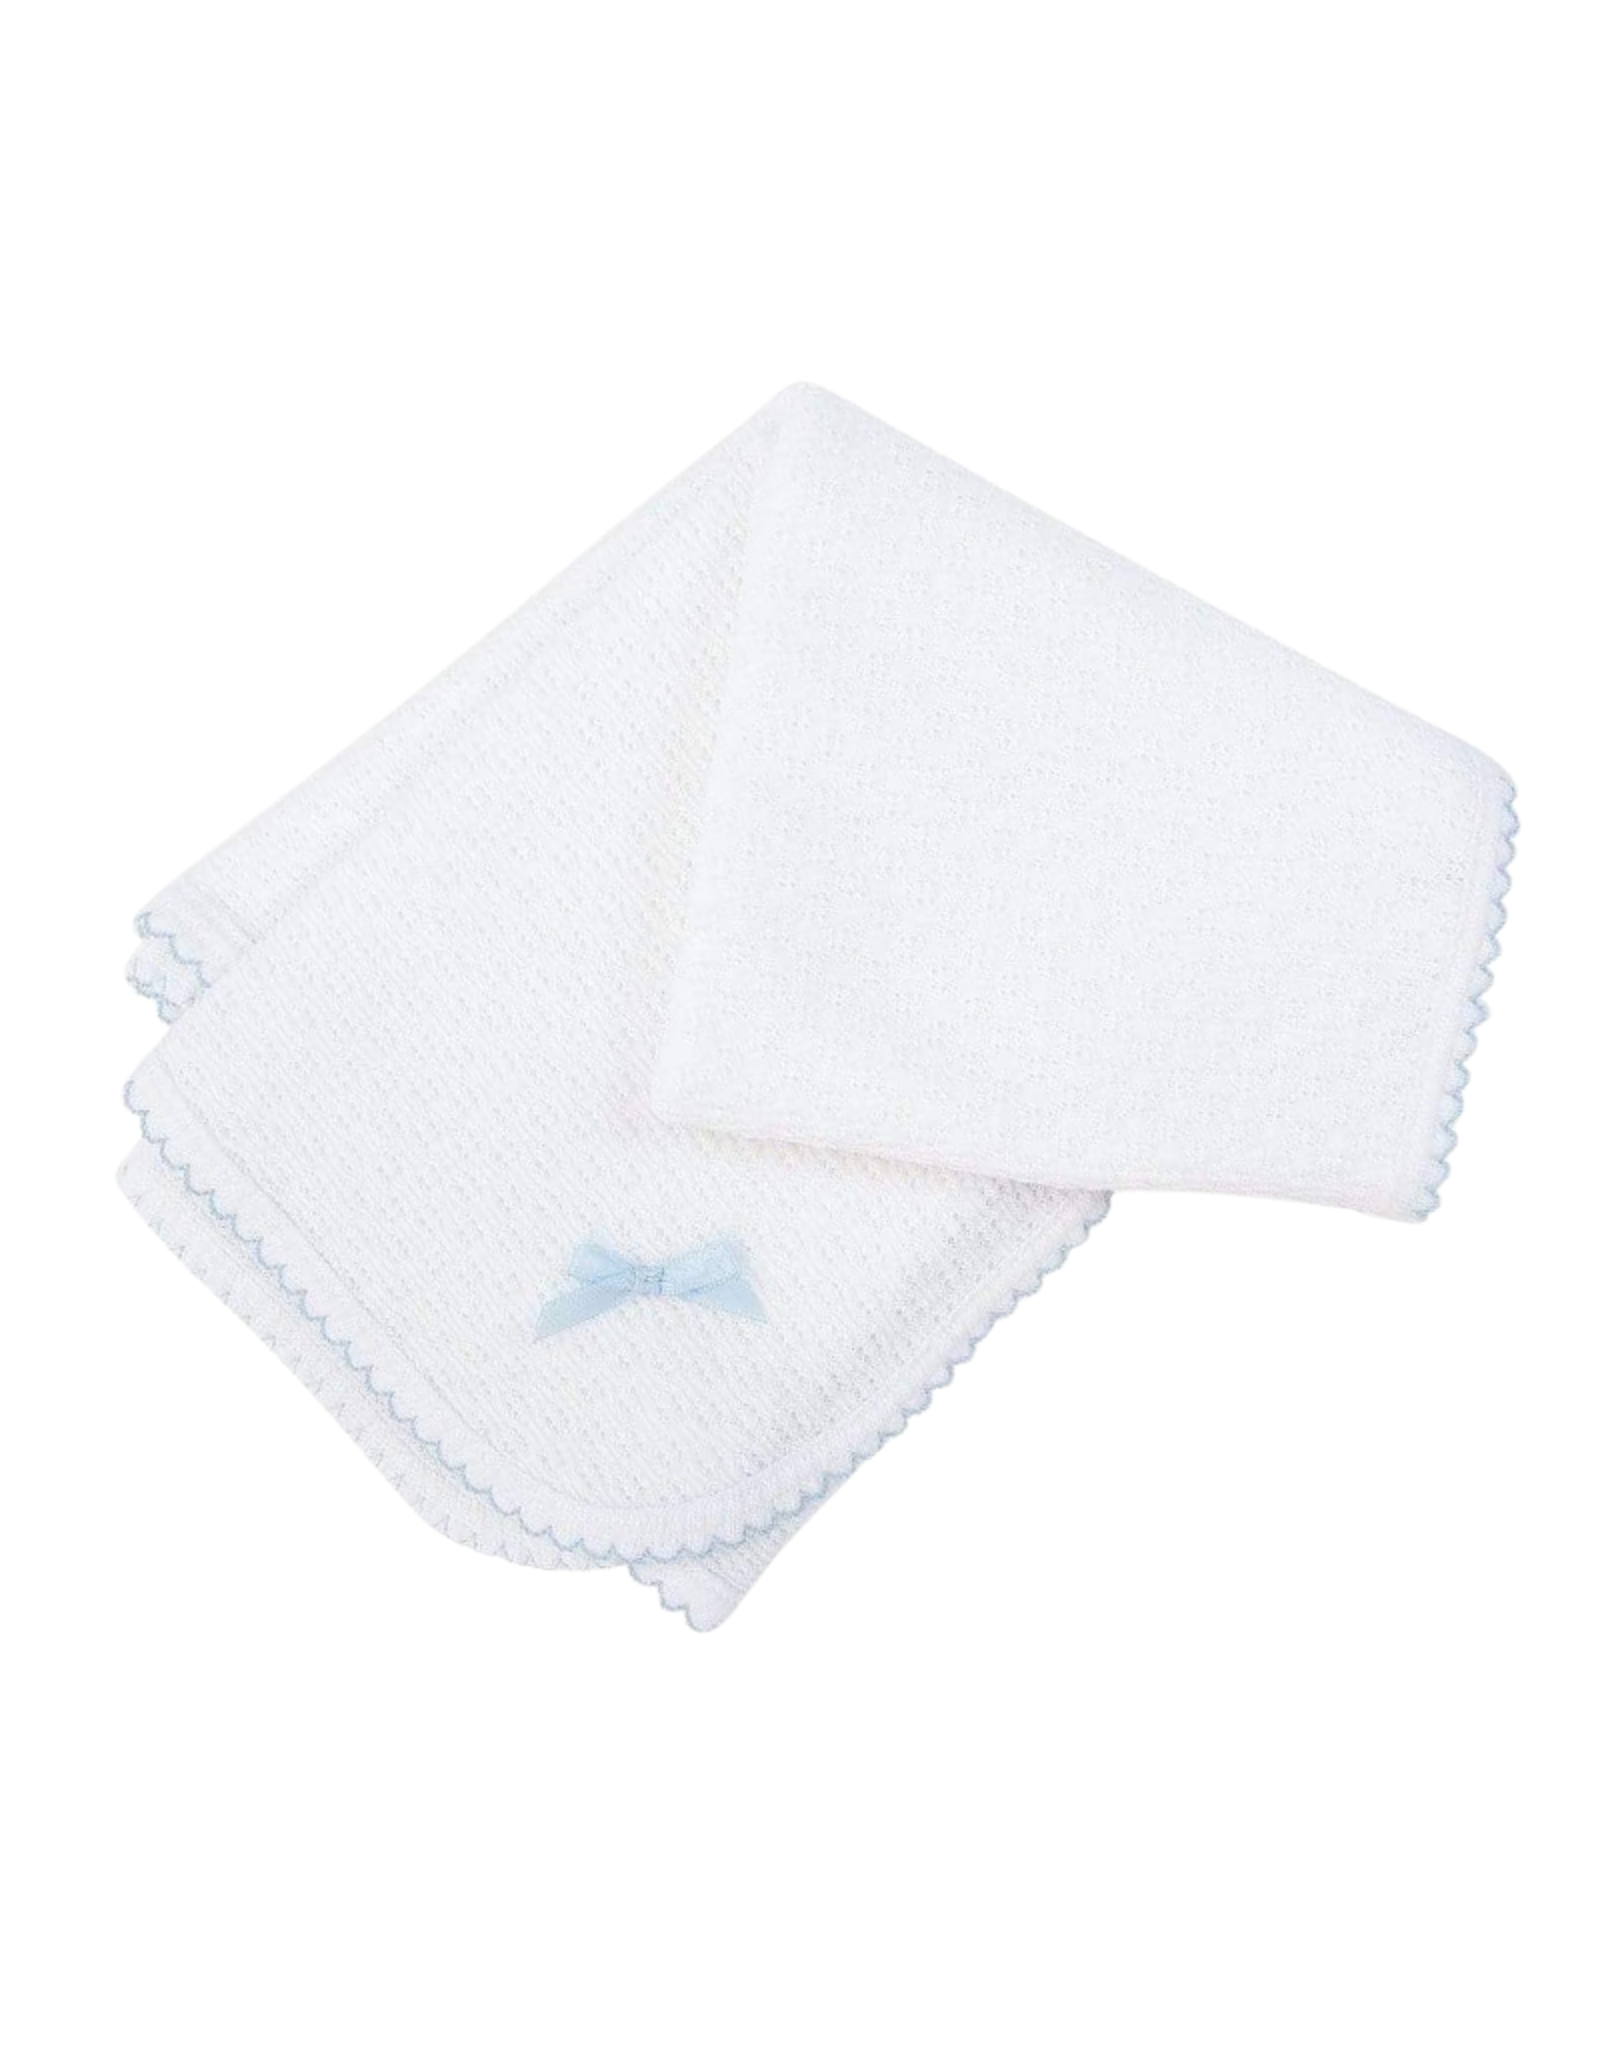 Paty Paty White Blanket With Trim Blue